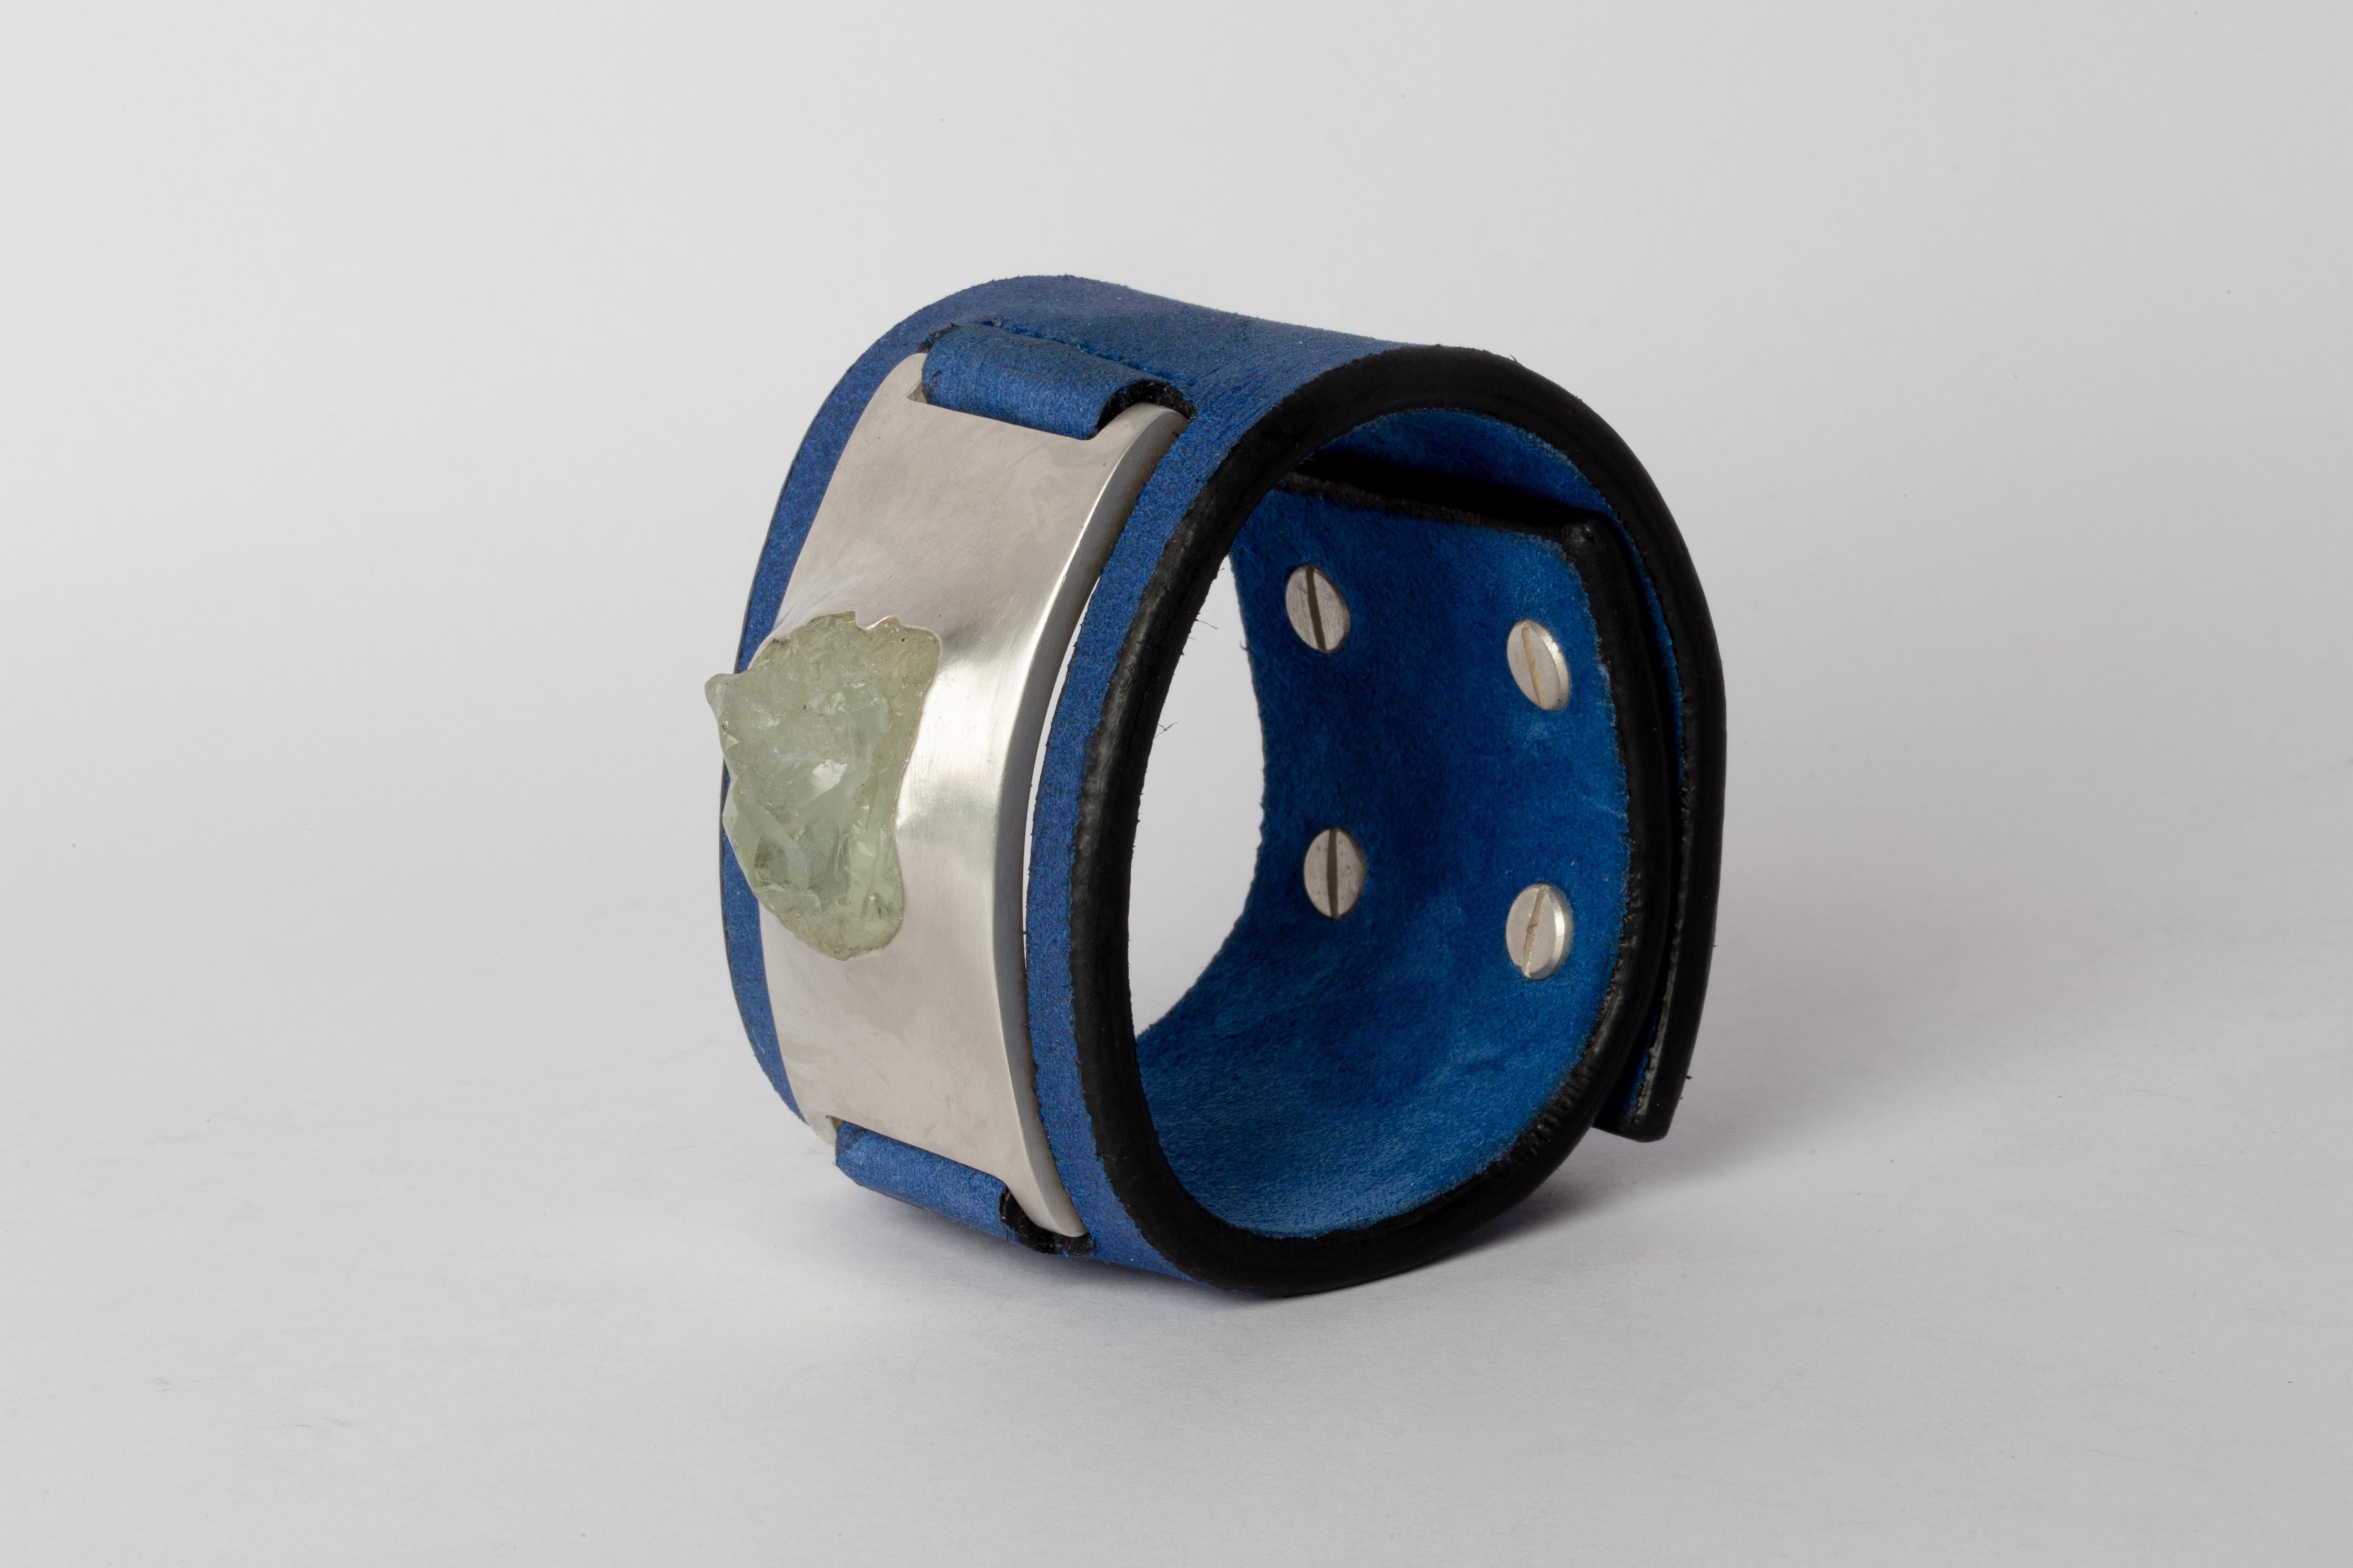 Bracelet in acid treated silver plated brass, aquamarine, and blue kudu waxy leather. This item is made with a naturally occurring element and will vary from the photograph you see. Each piece is unique and this is what makes it special.